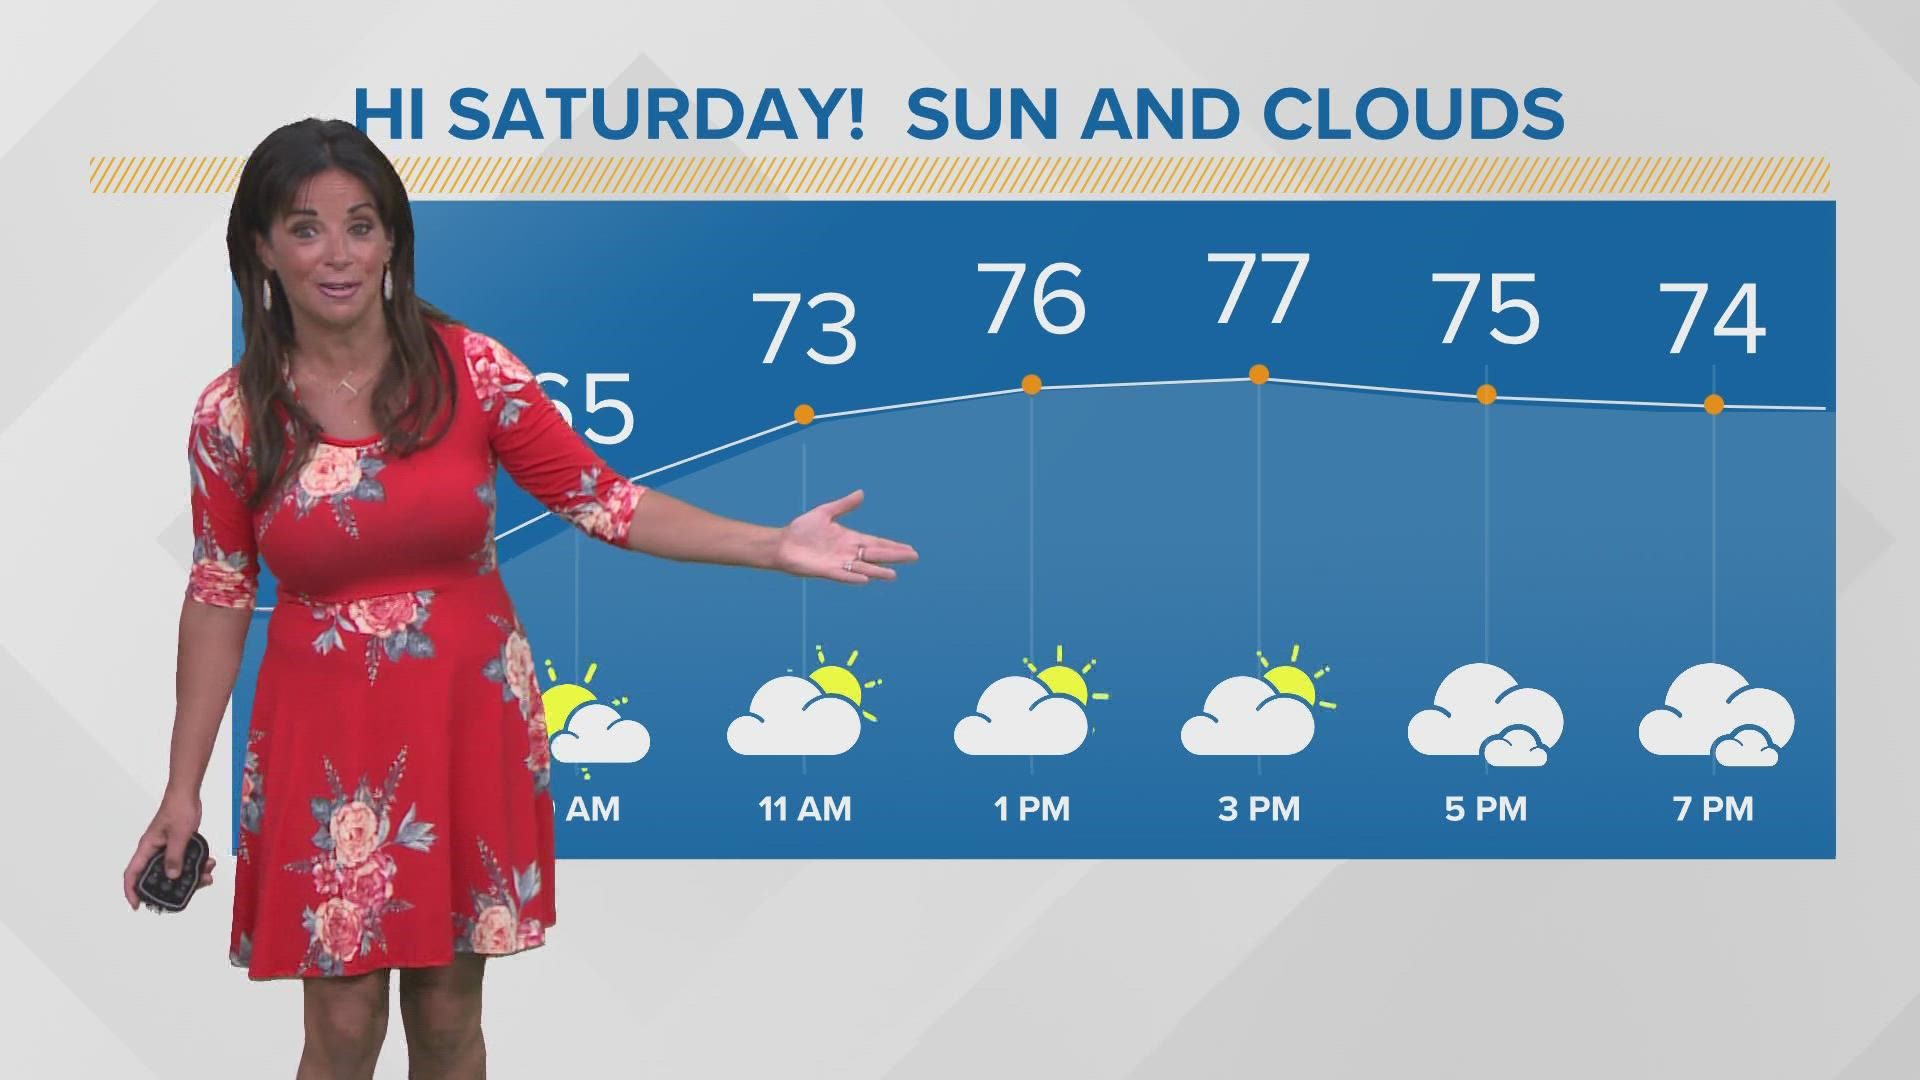 Hollie says there's a chance of rain, but you won't need to cancel any of your plans today.